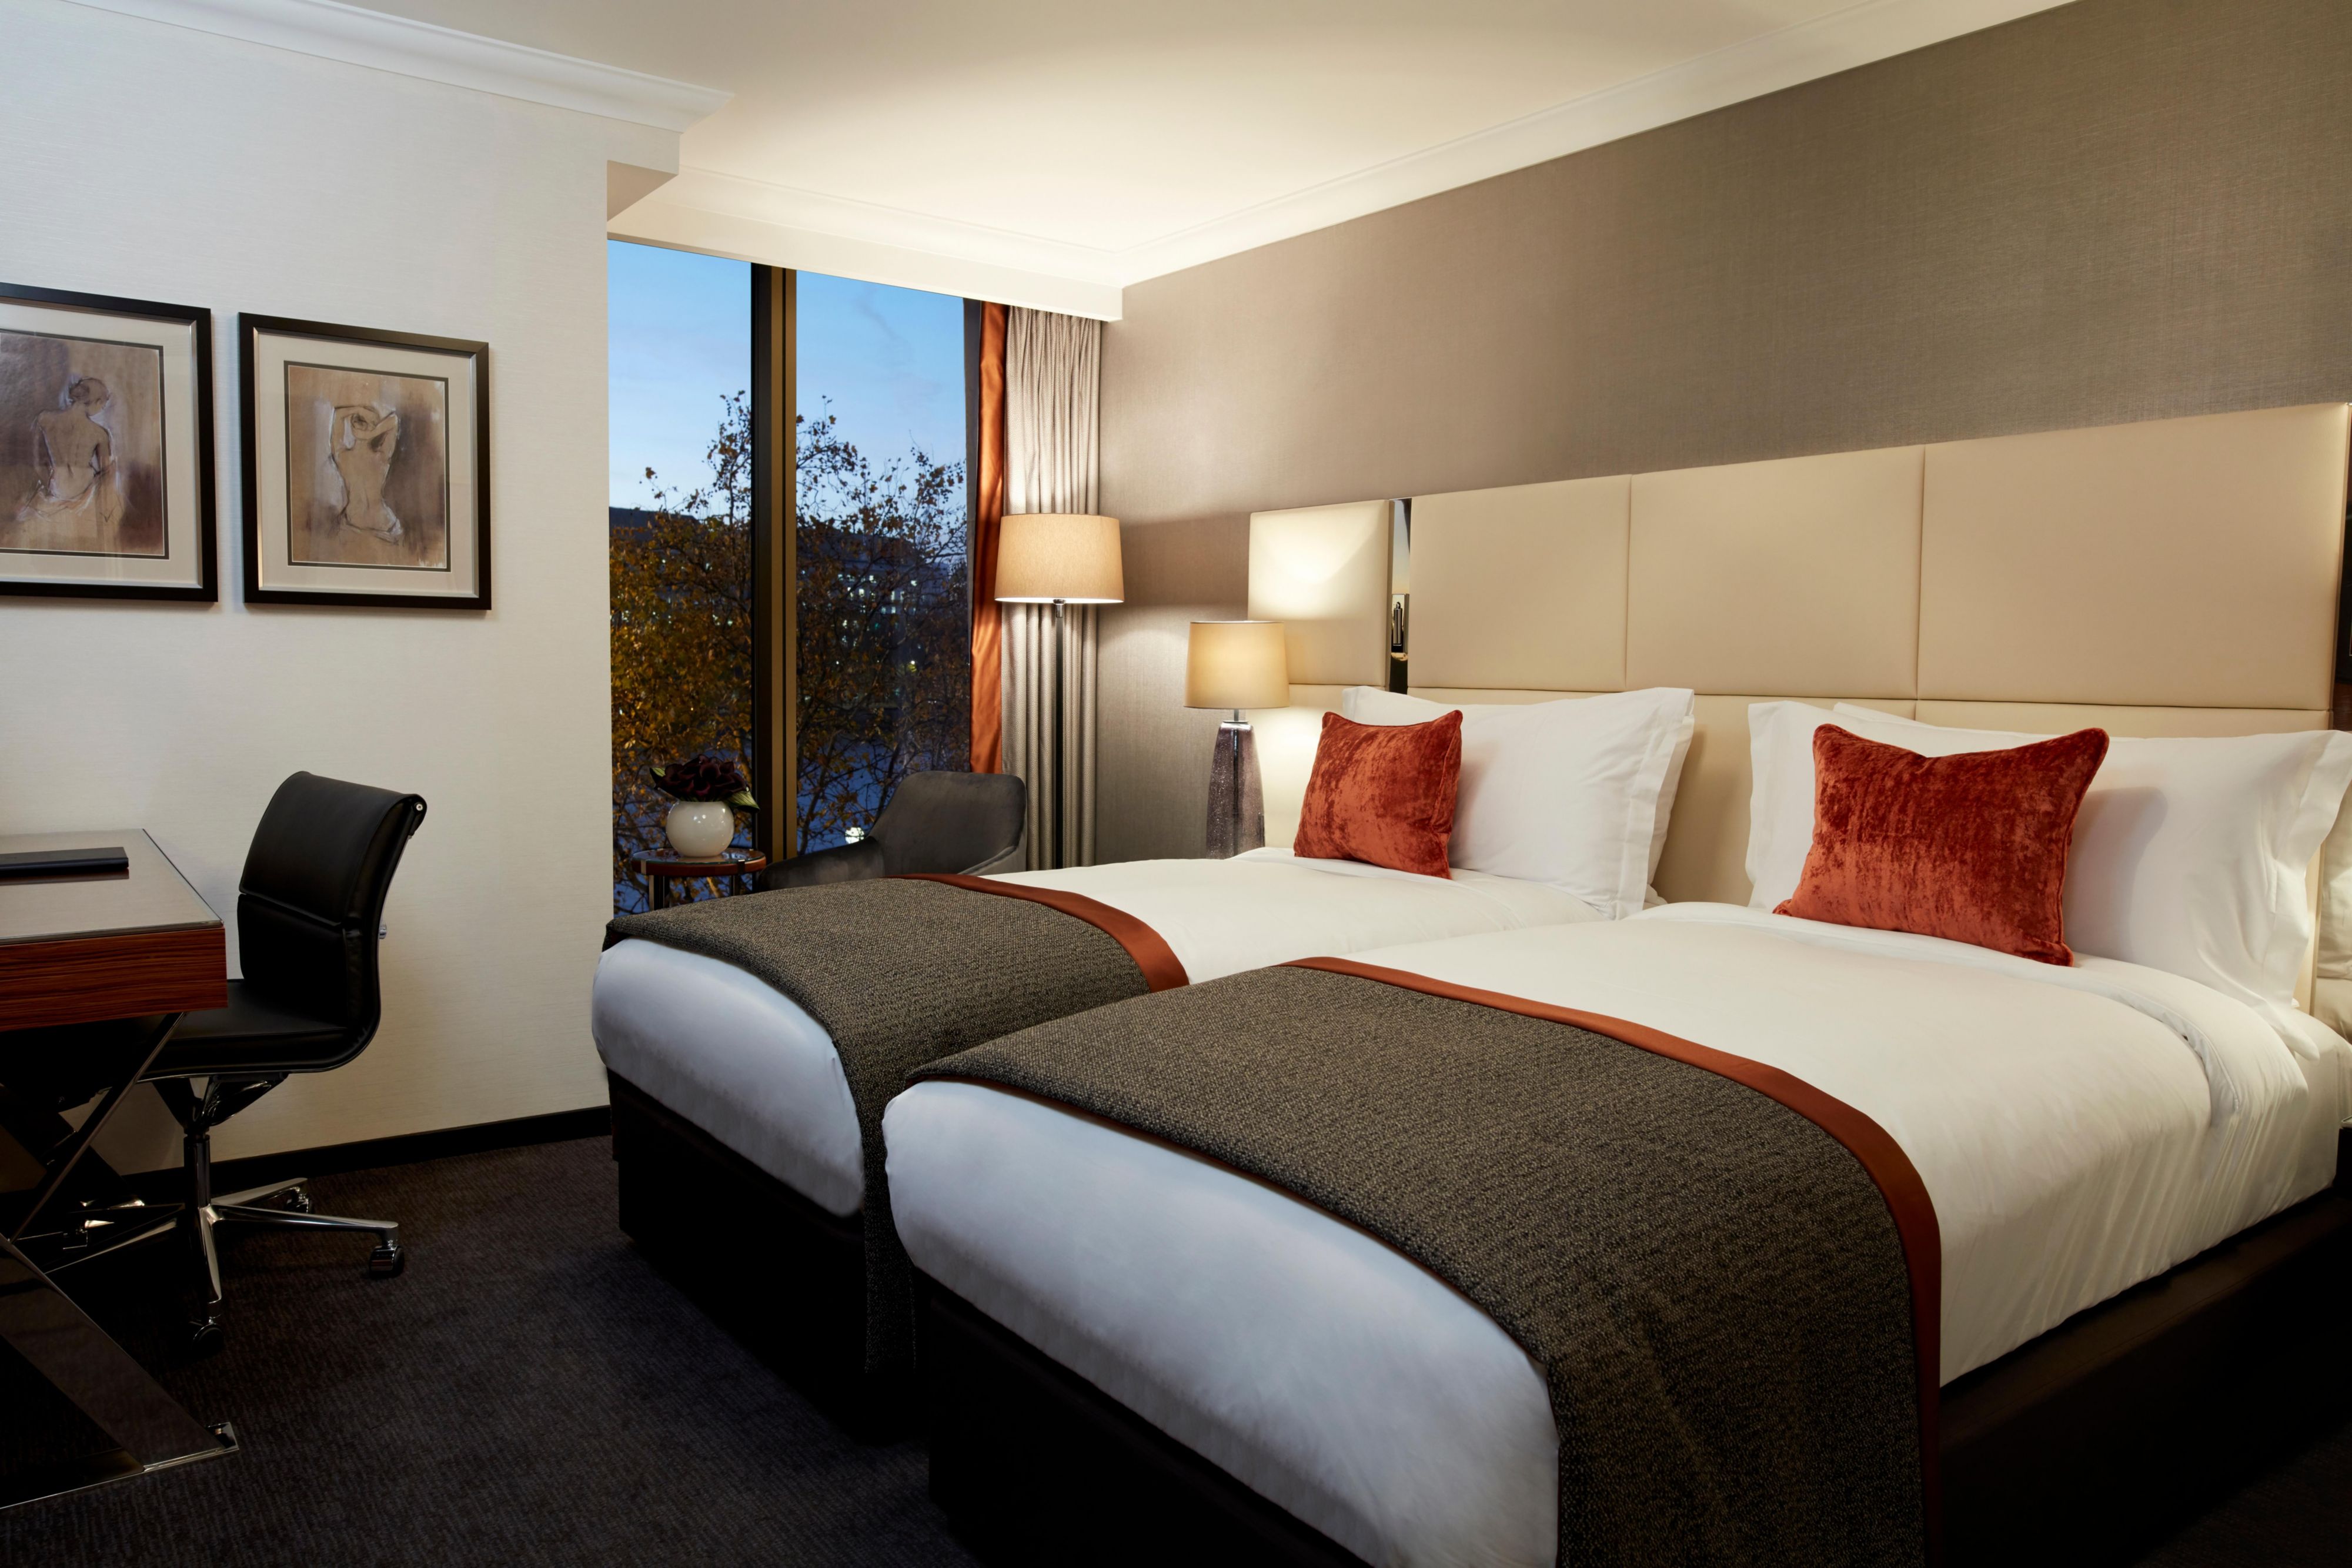 The River Thames offers a peaceful backdrop to our twin rooms